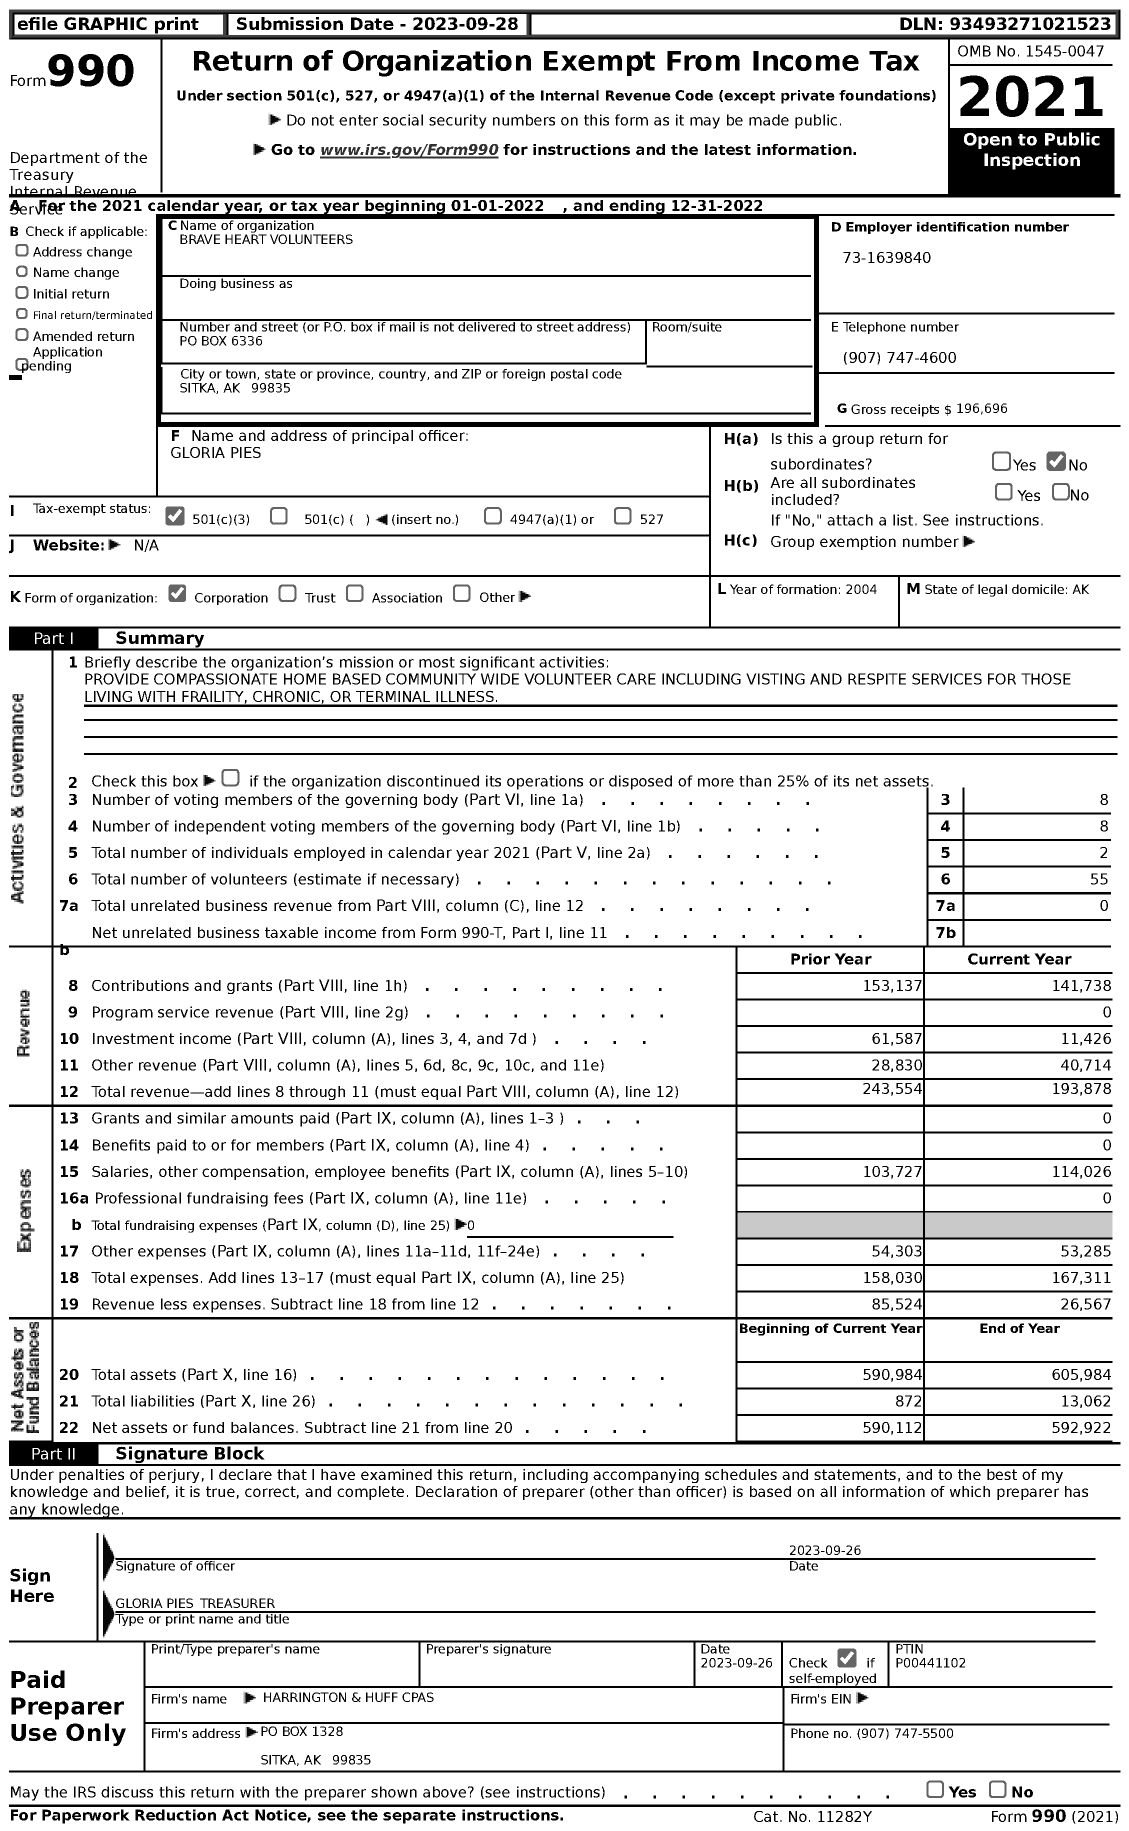 Image of first page of 2022 Form 990 for Brave Heart Volunteers